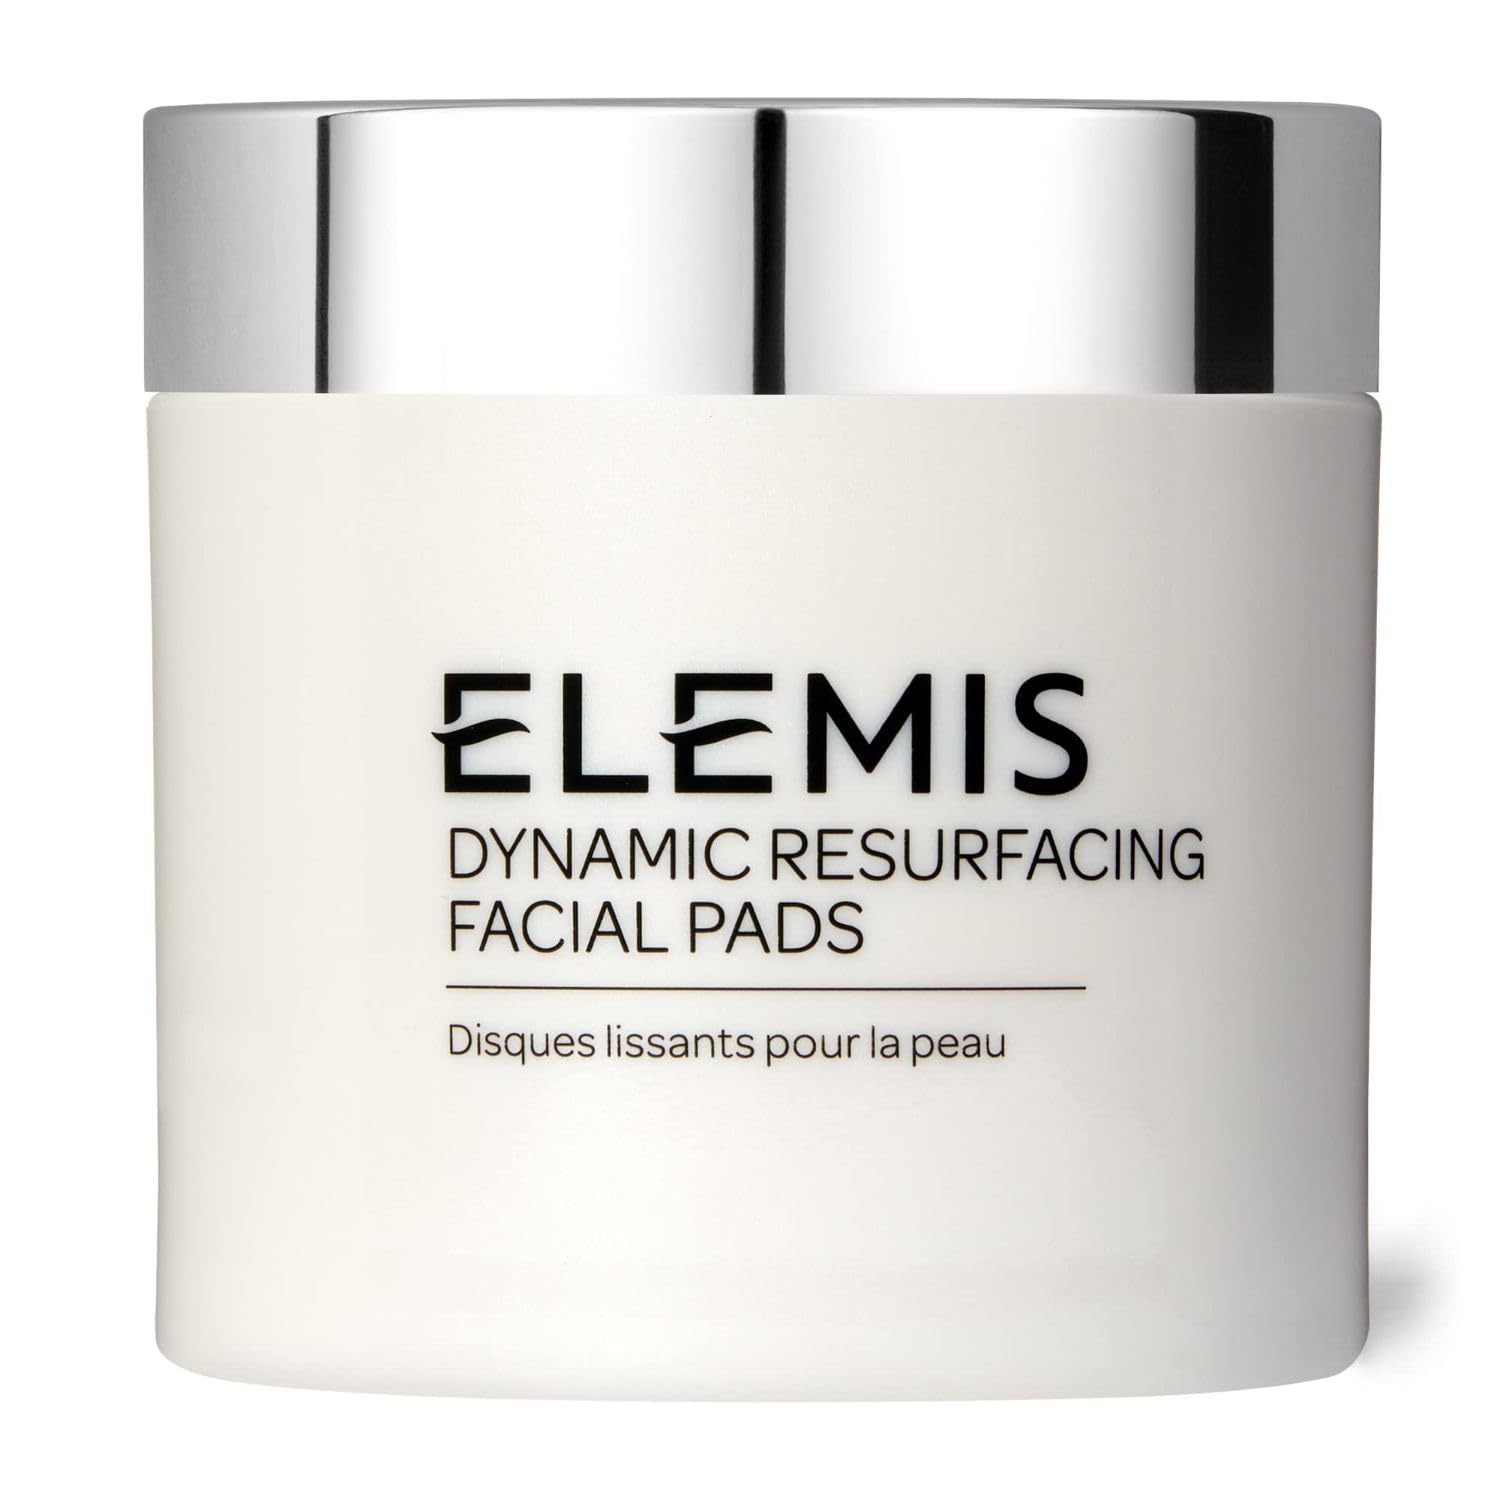 ELEMIS Dynamic Resurfacing Facial Pads | Gentle Dual-Action Textured Treatment Pads Conveniently Smooth, Resurface, and Exfoliate Skin | 60 Count